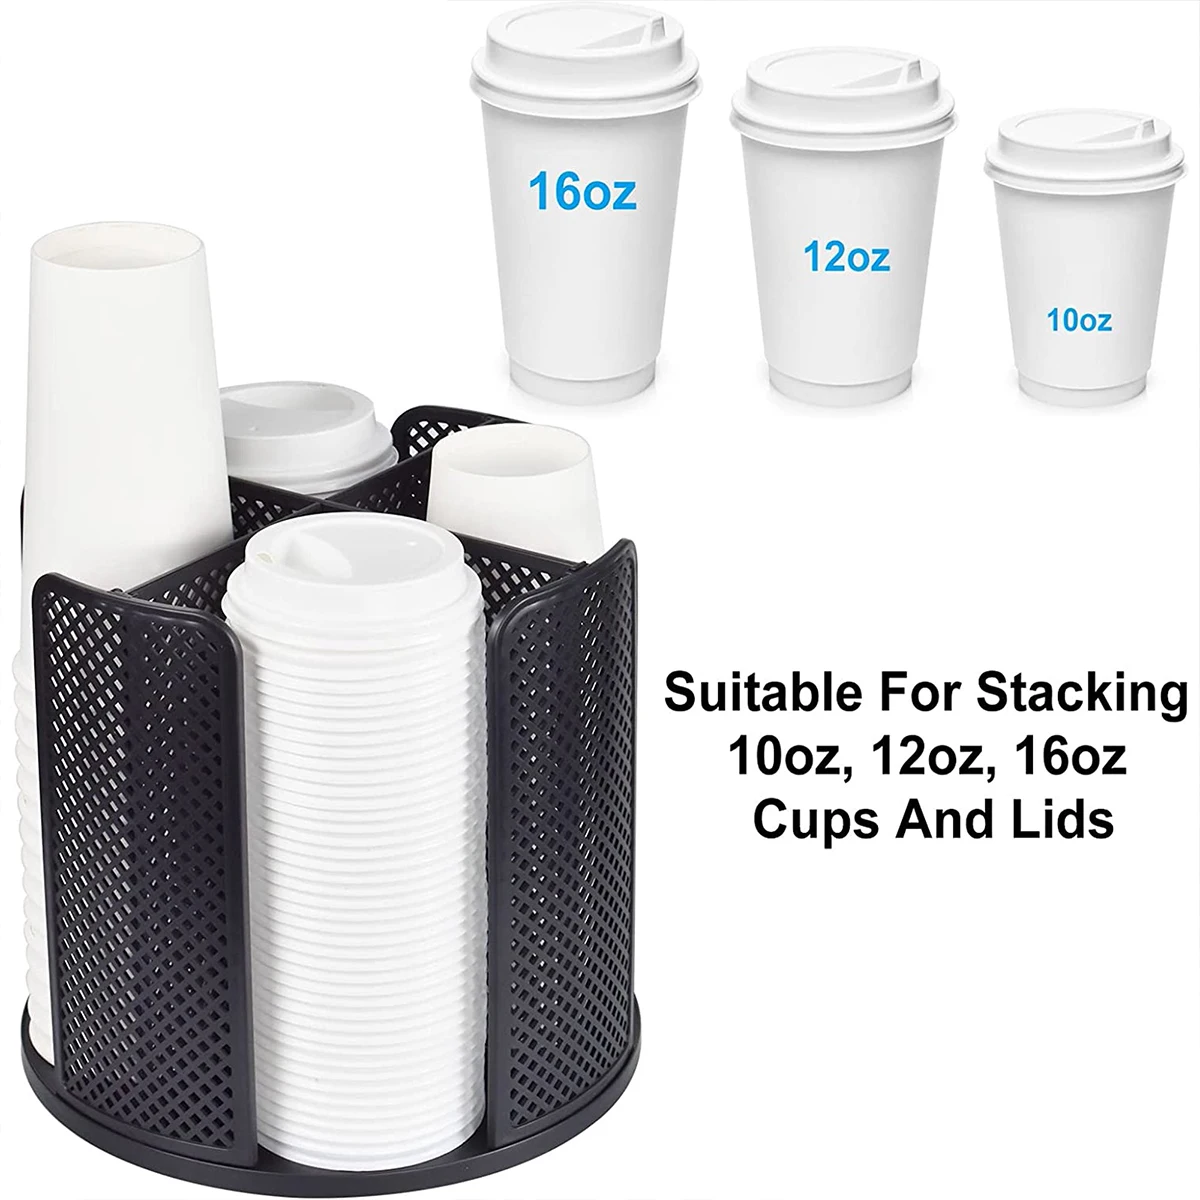 https://ae01.alicdn.com/kf/S00468c187c5848f396323eb7aaf1132bU/360-Rotatable-Paper-Cup-and-Lid-Holder-Plastic-Cup-Storage-Organizer-Coffee-Cup-Dispenser-for-Coffee.jpg